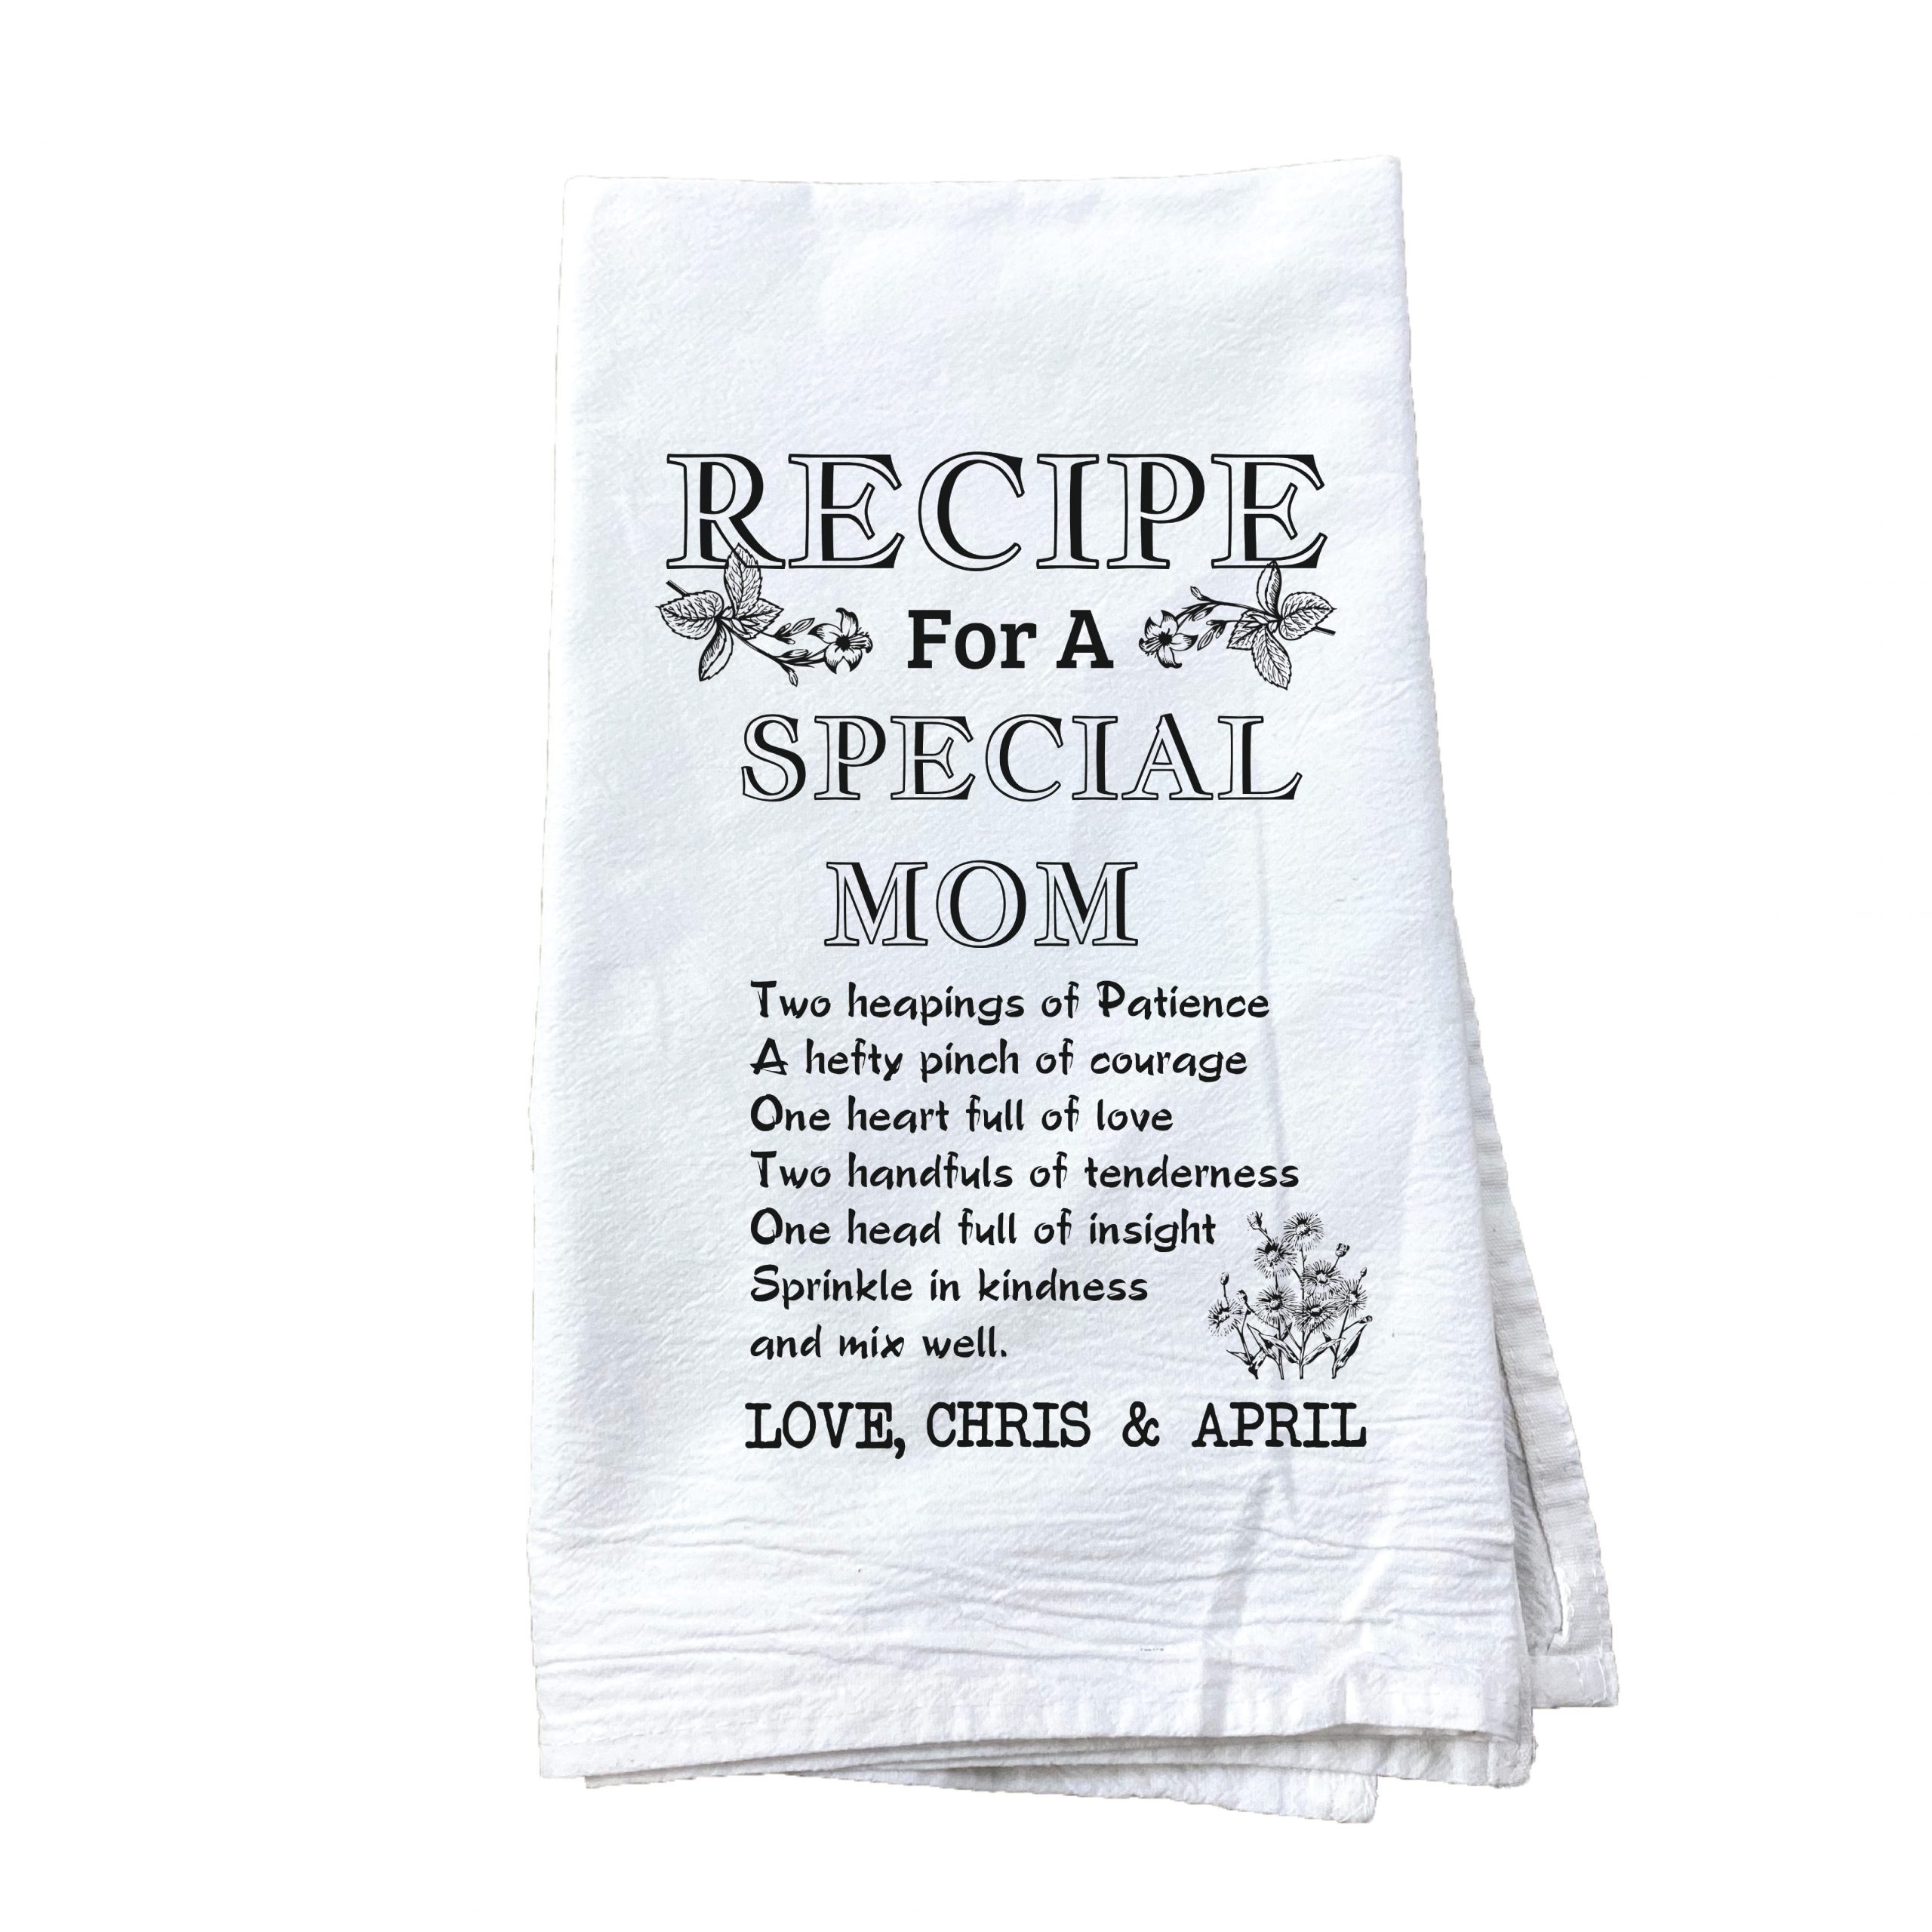 https://cottoncreations.com/content/uploads/2022/01/Recipe-for-a-special-Mom-on-towel-scaled.jpg